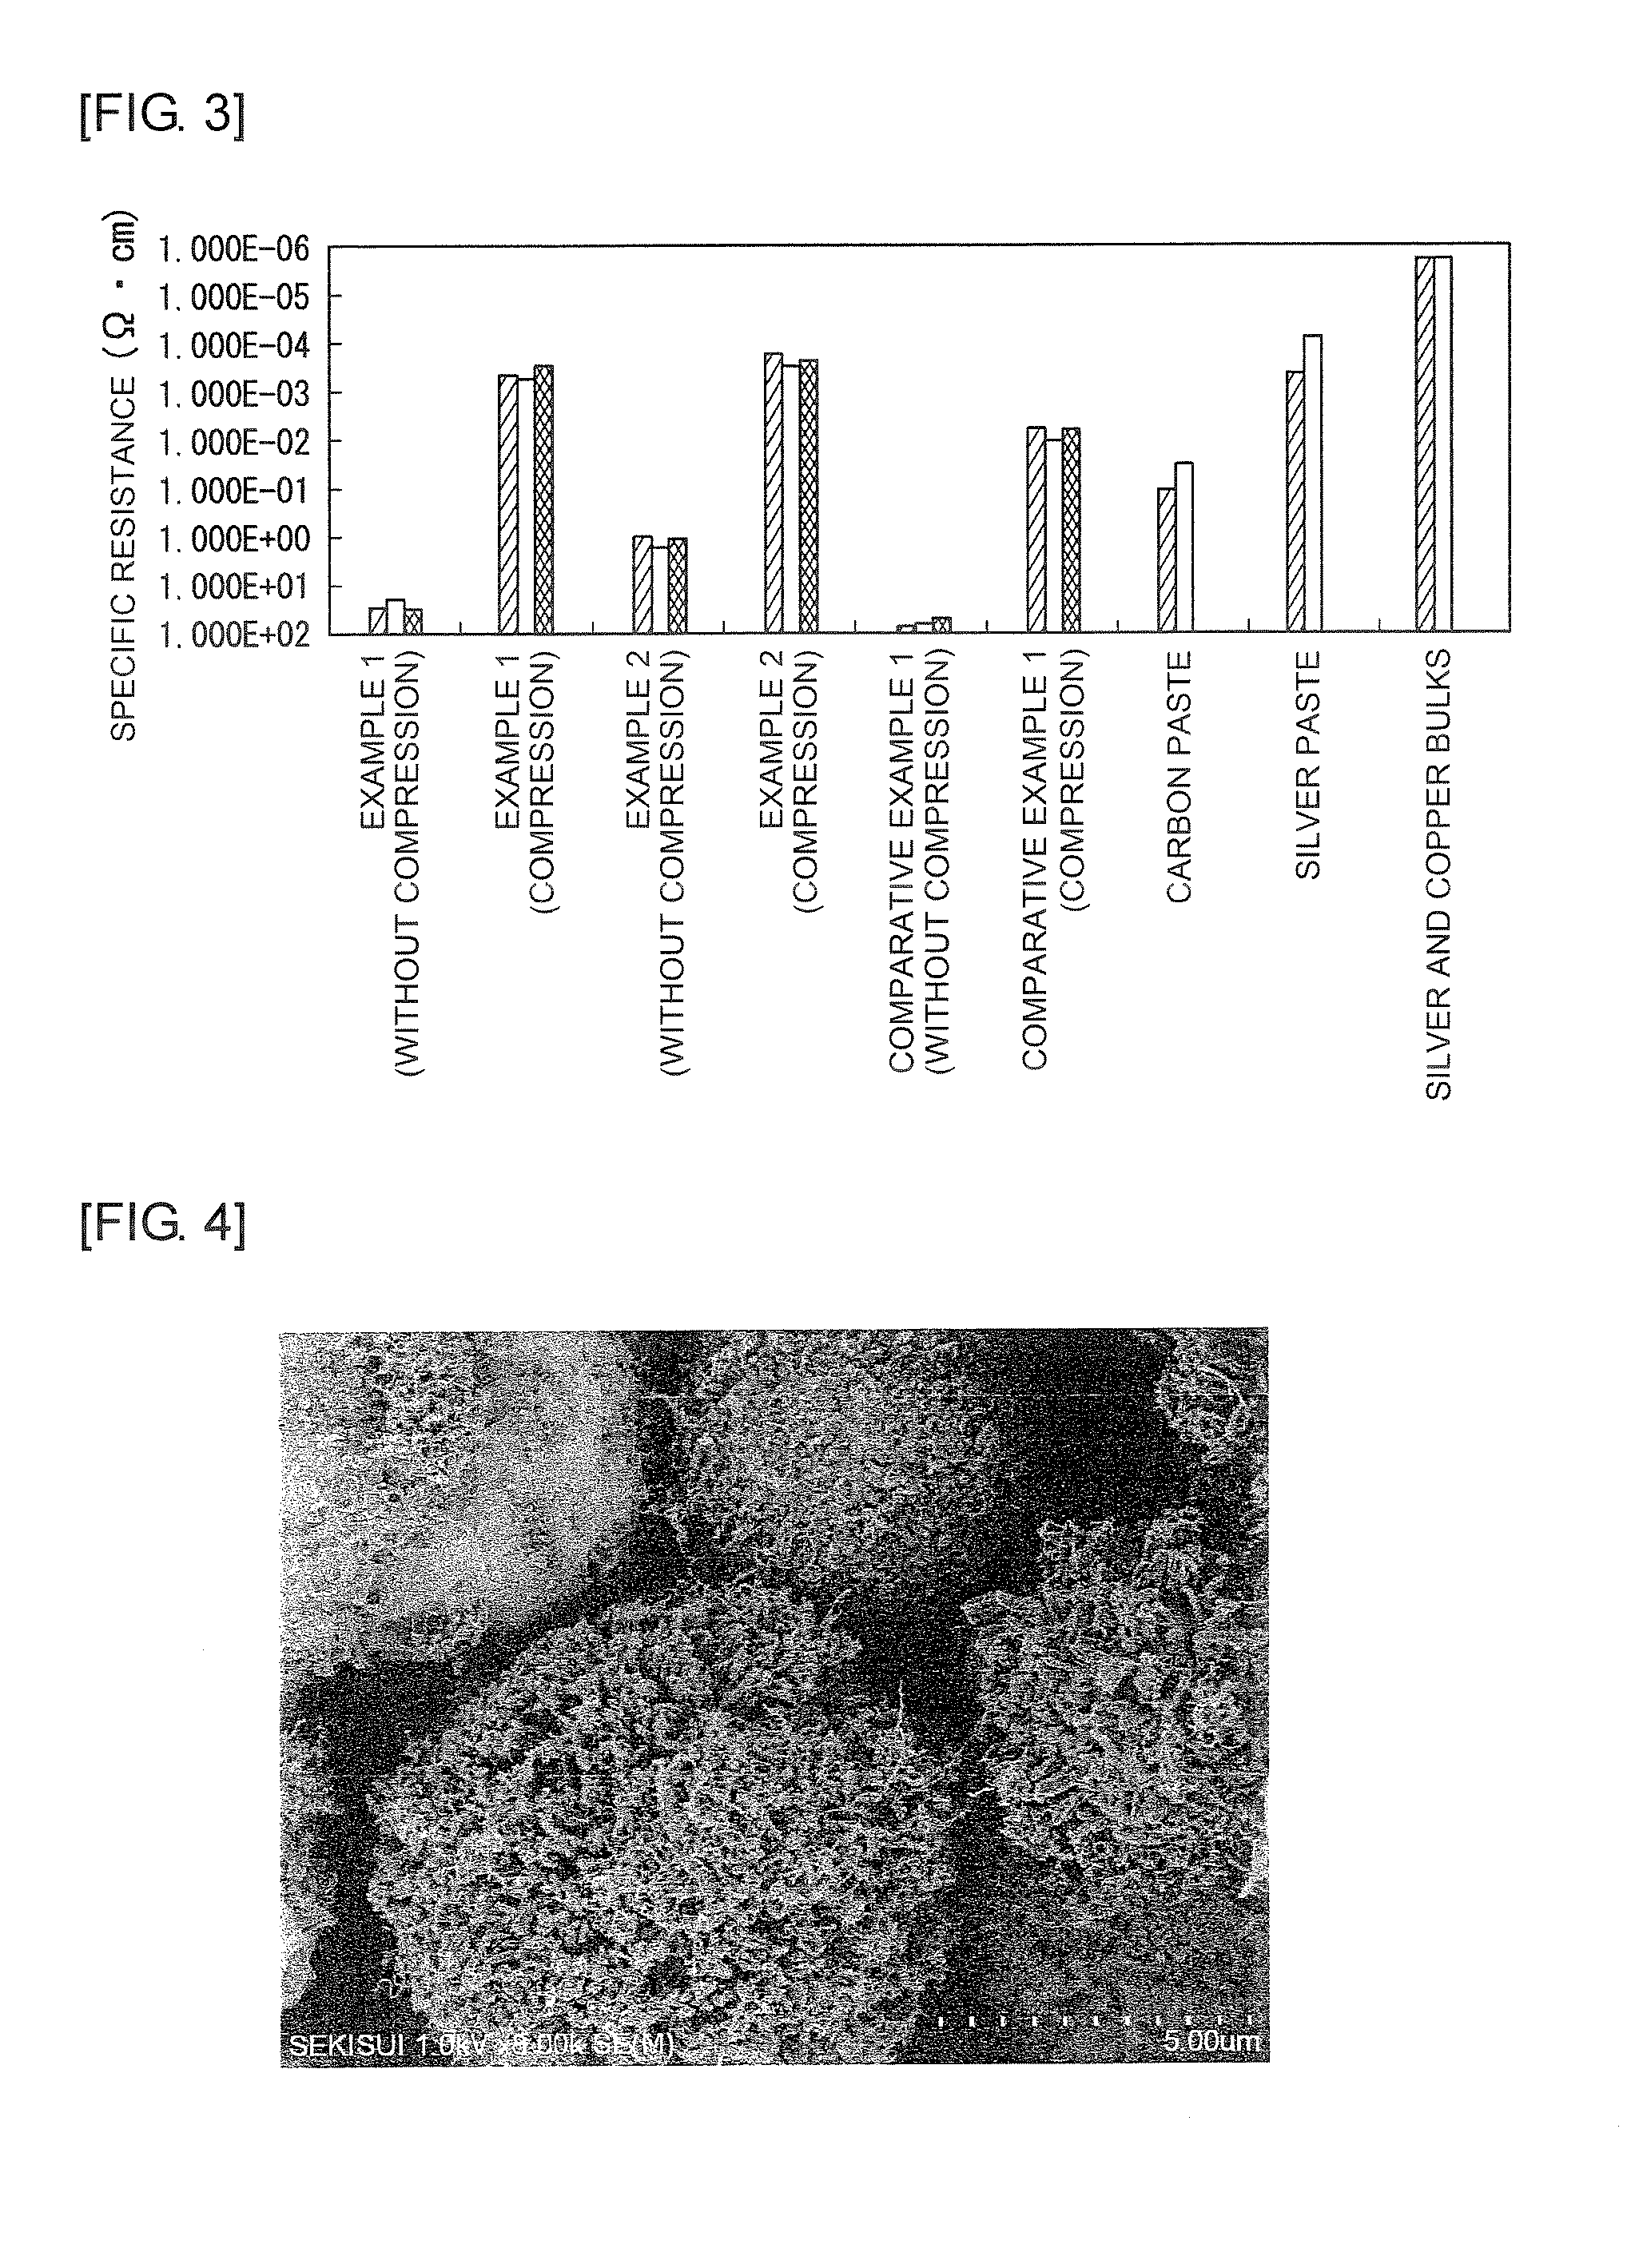 Conductive filler, method for producing same, conductive paste and method for producing conductive paste